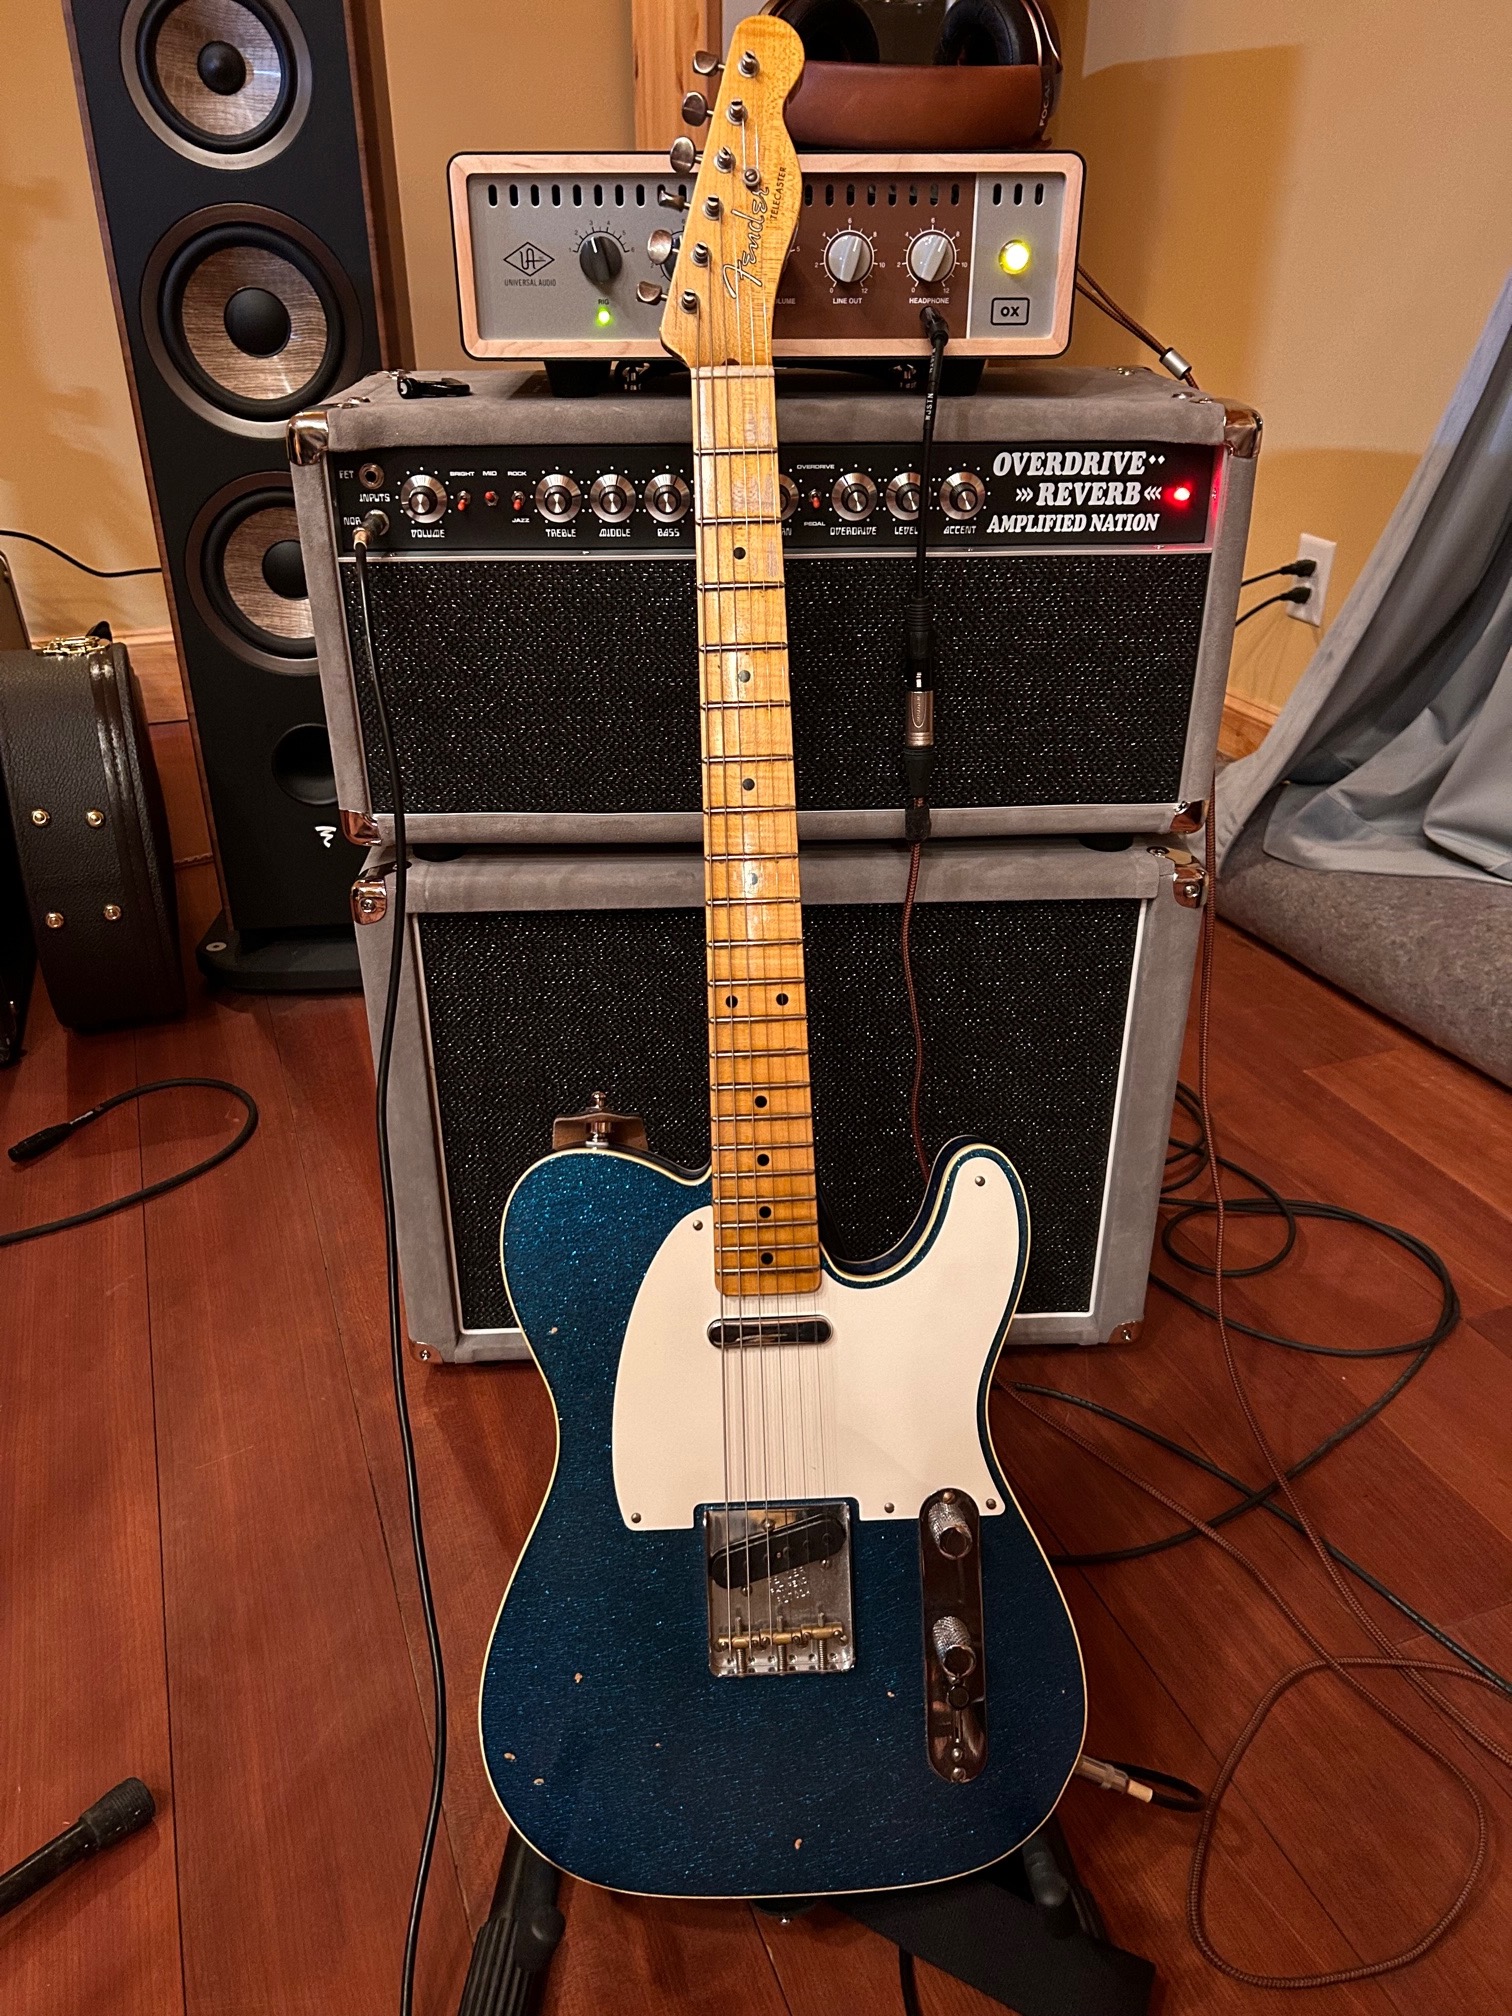 Telecaster Love Thread, No Archtops Allowed-img_0187-jpg